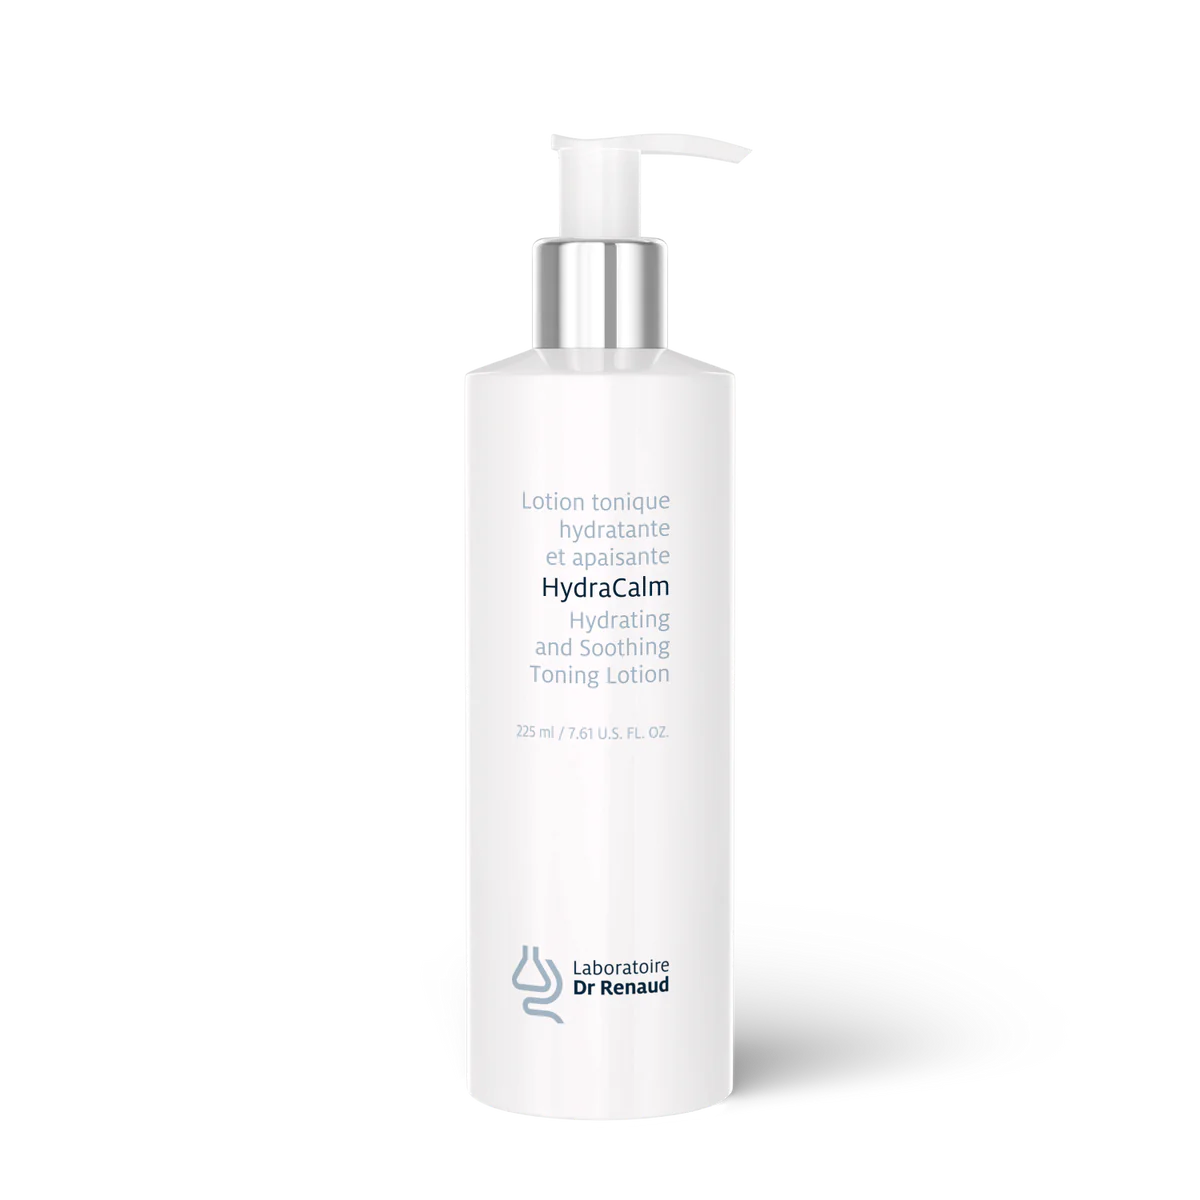 HydraCalm Hydrating & Soothing Toning Lotion